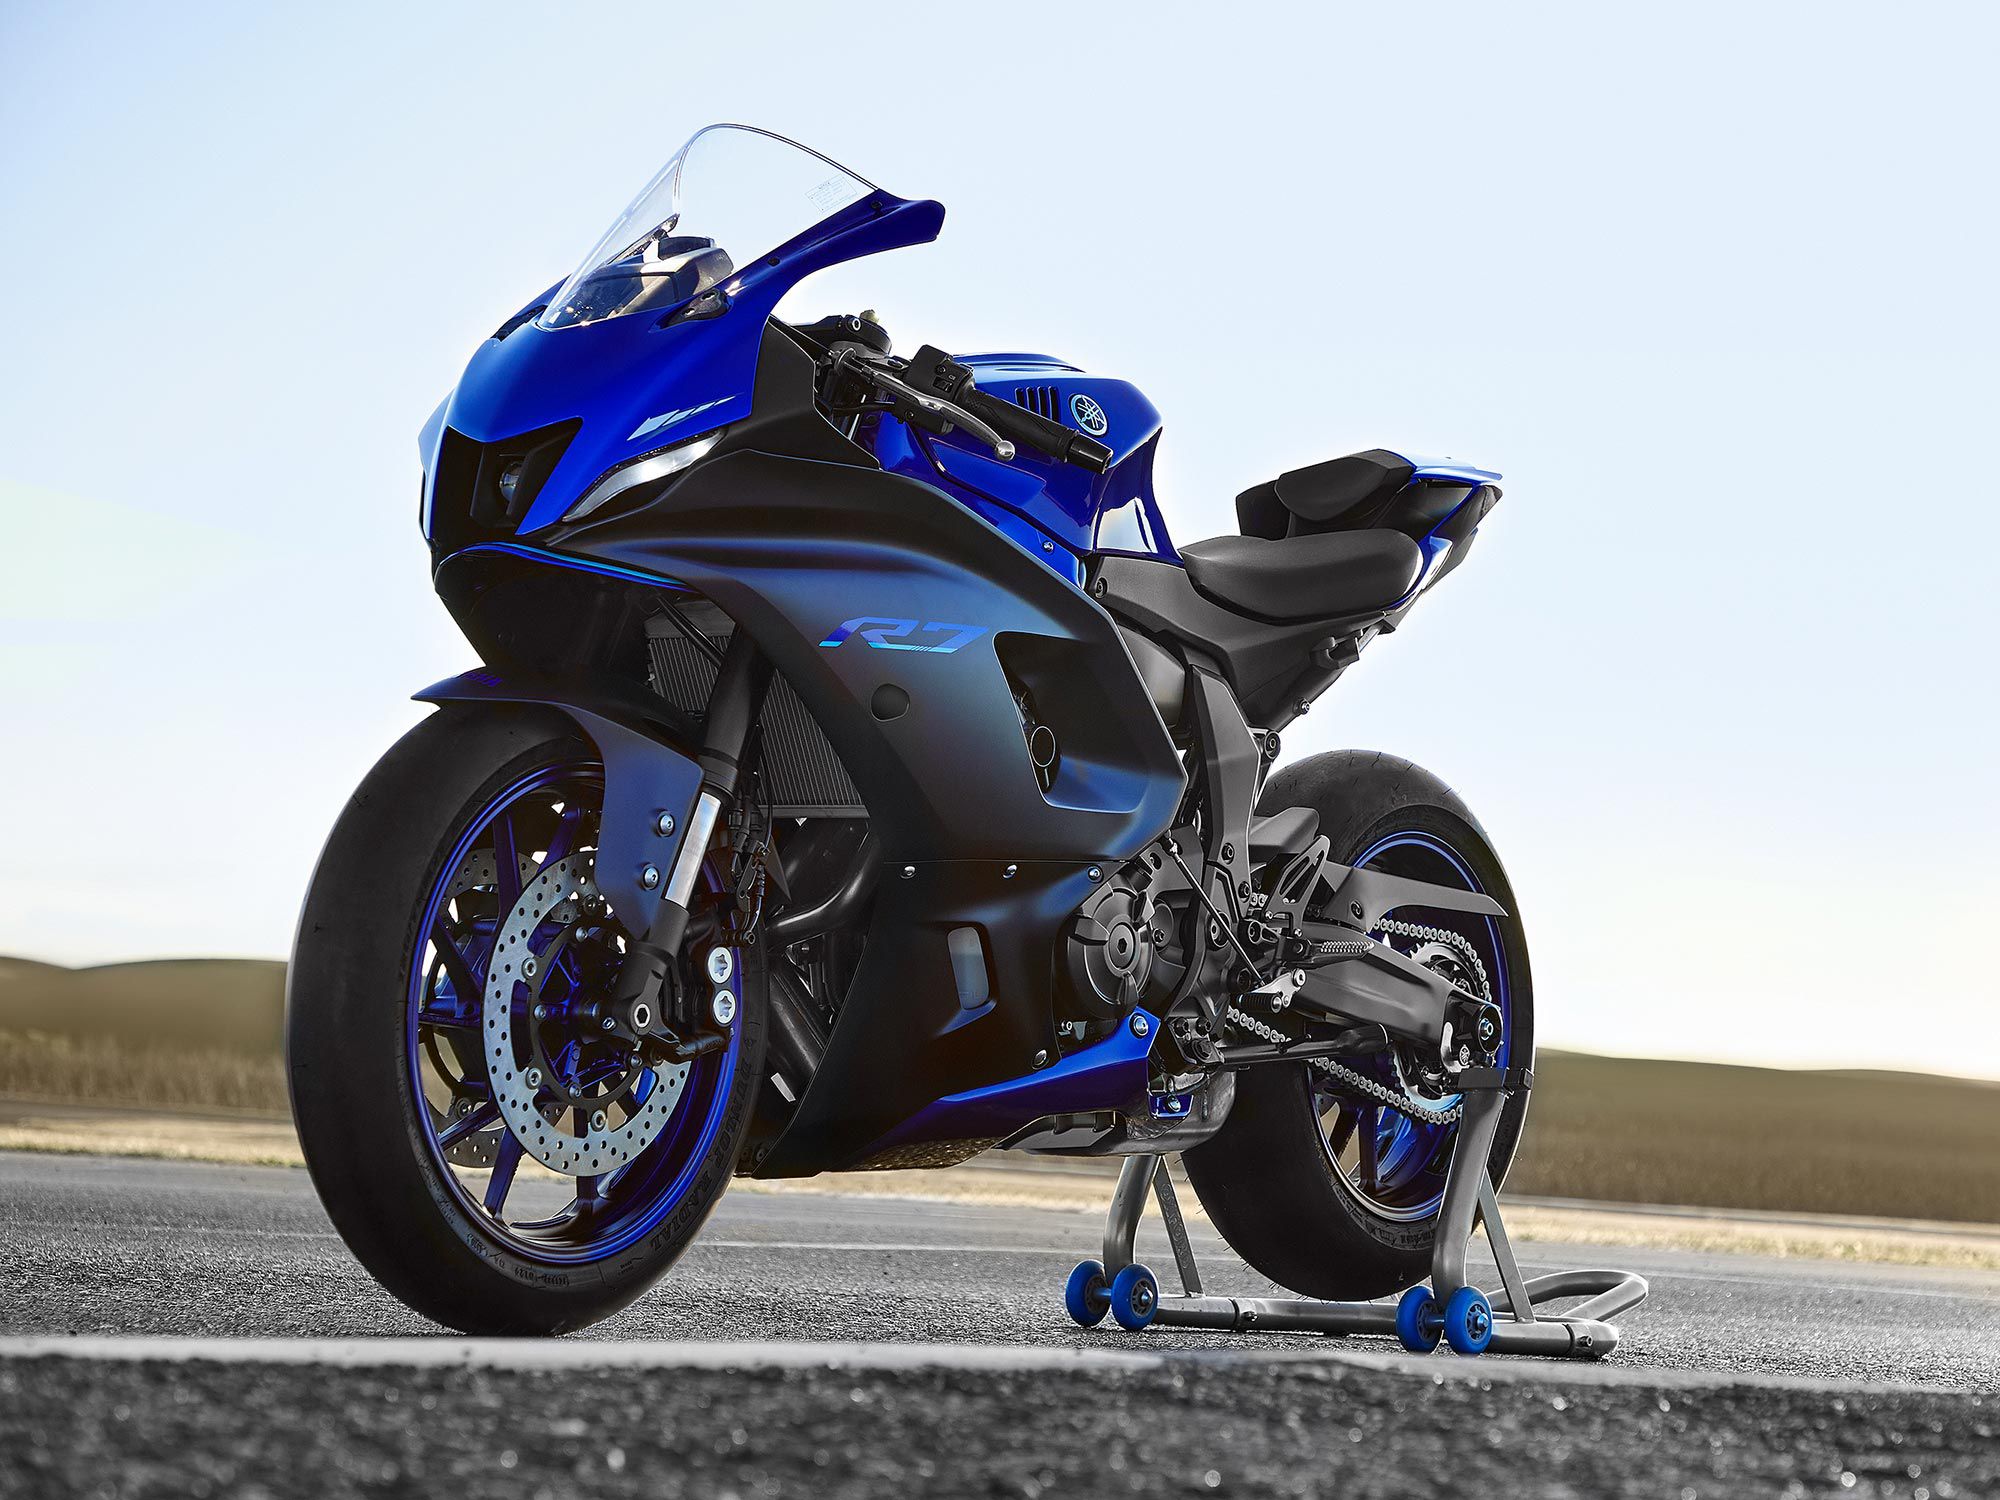 Yamaha revives the YZF-R7 nameplate for its twin-cylinder sportbike.